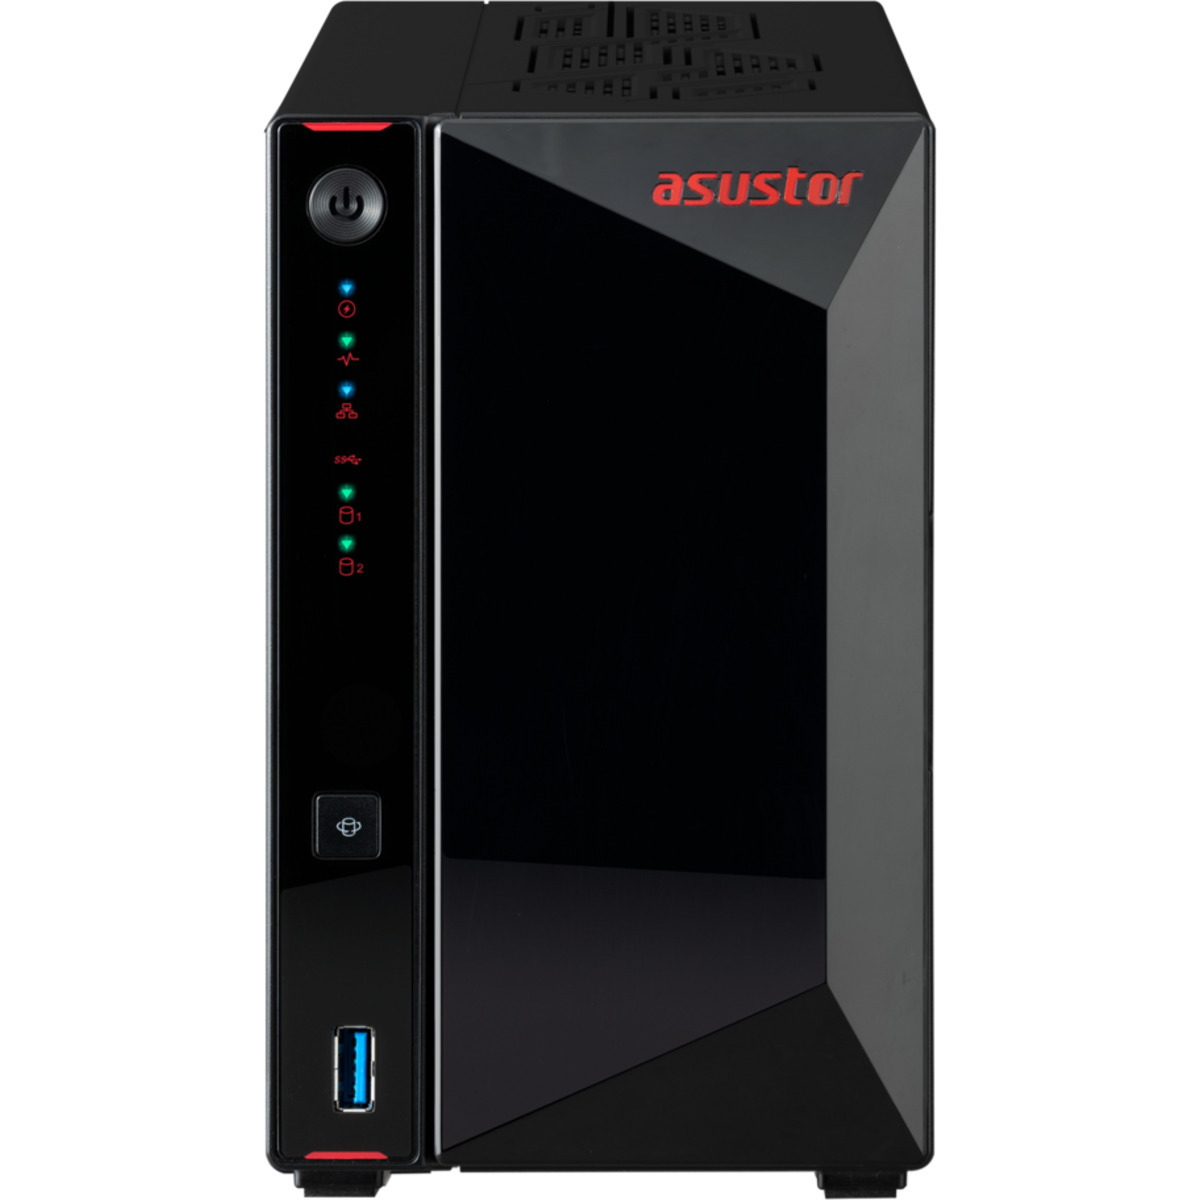 ASUSTOR Nimbustor 2 Gen2 AS5402T 8tb 2-Bay Desktop Multimedia / Power User / Business NAS - Network Attached Storage Device 2x4tb Crucial MX500 CT4000MX500SSD1 2.5 560/510MB/s SATA 6Gb/s SSD CONSUMER Class Drives Installed - Burn-In Tested - FREE RAM UPGRADE Nimbustor 2 Gen2 AS5402T